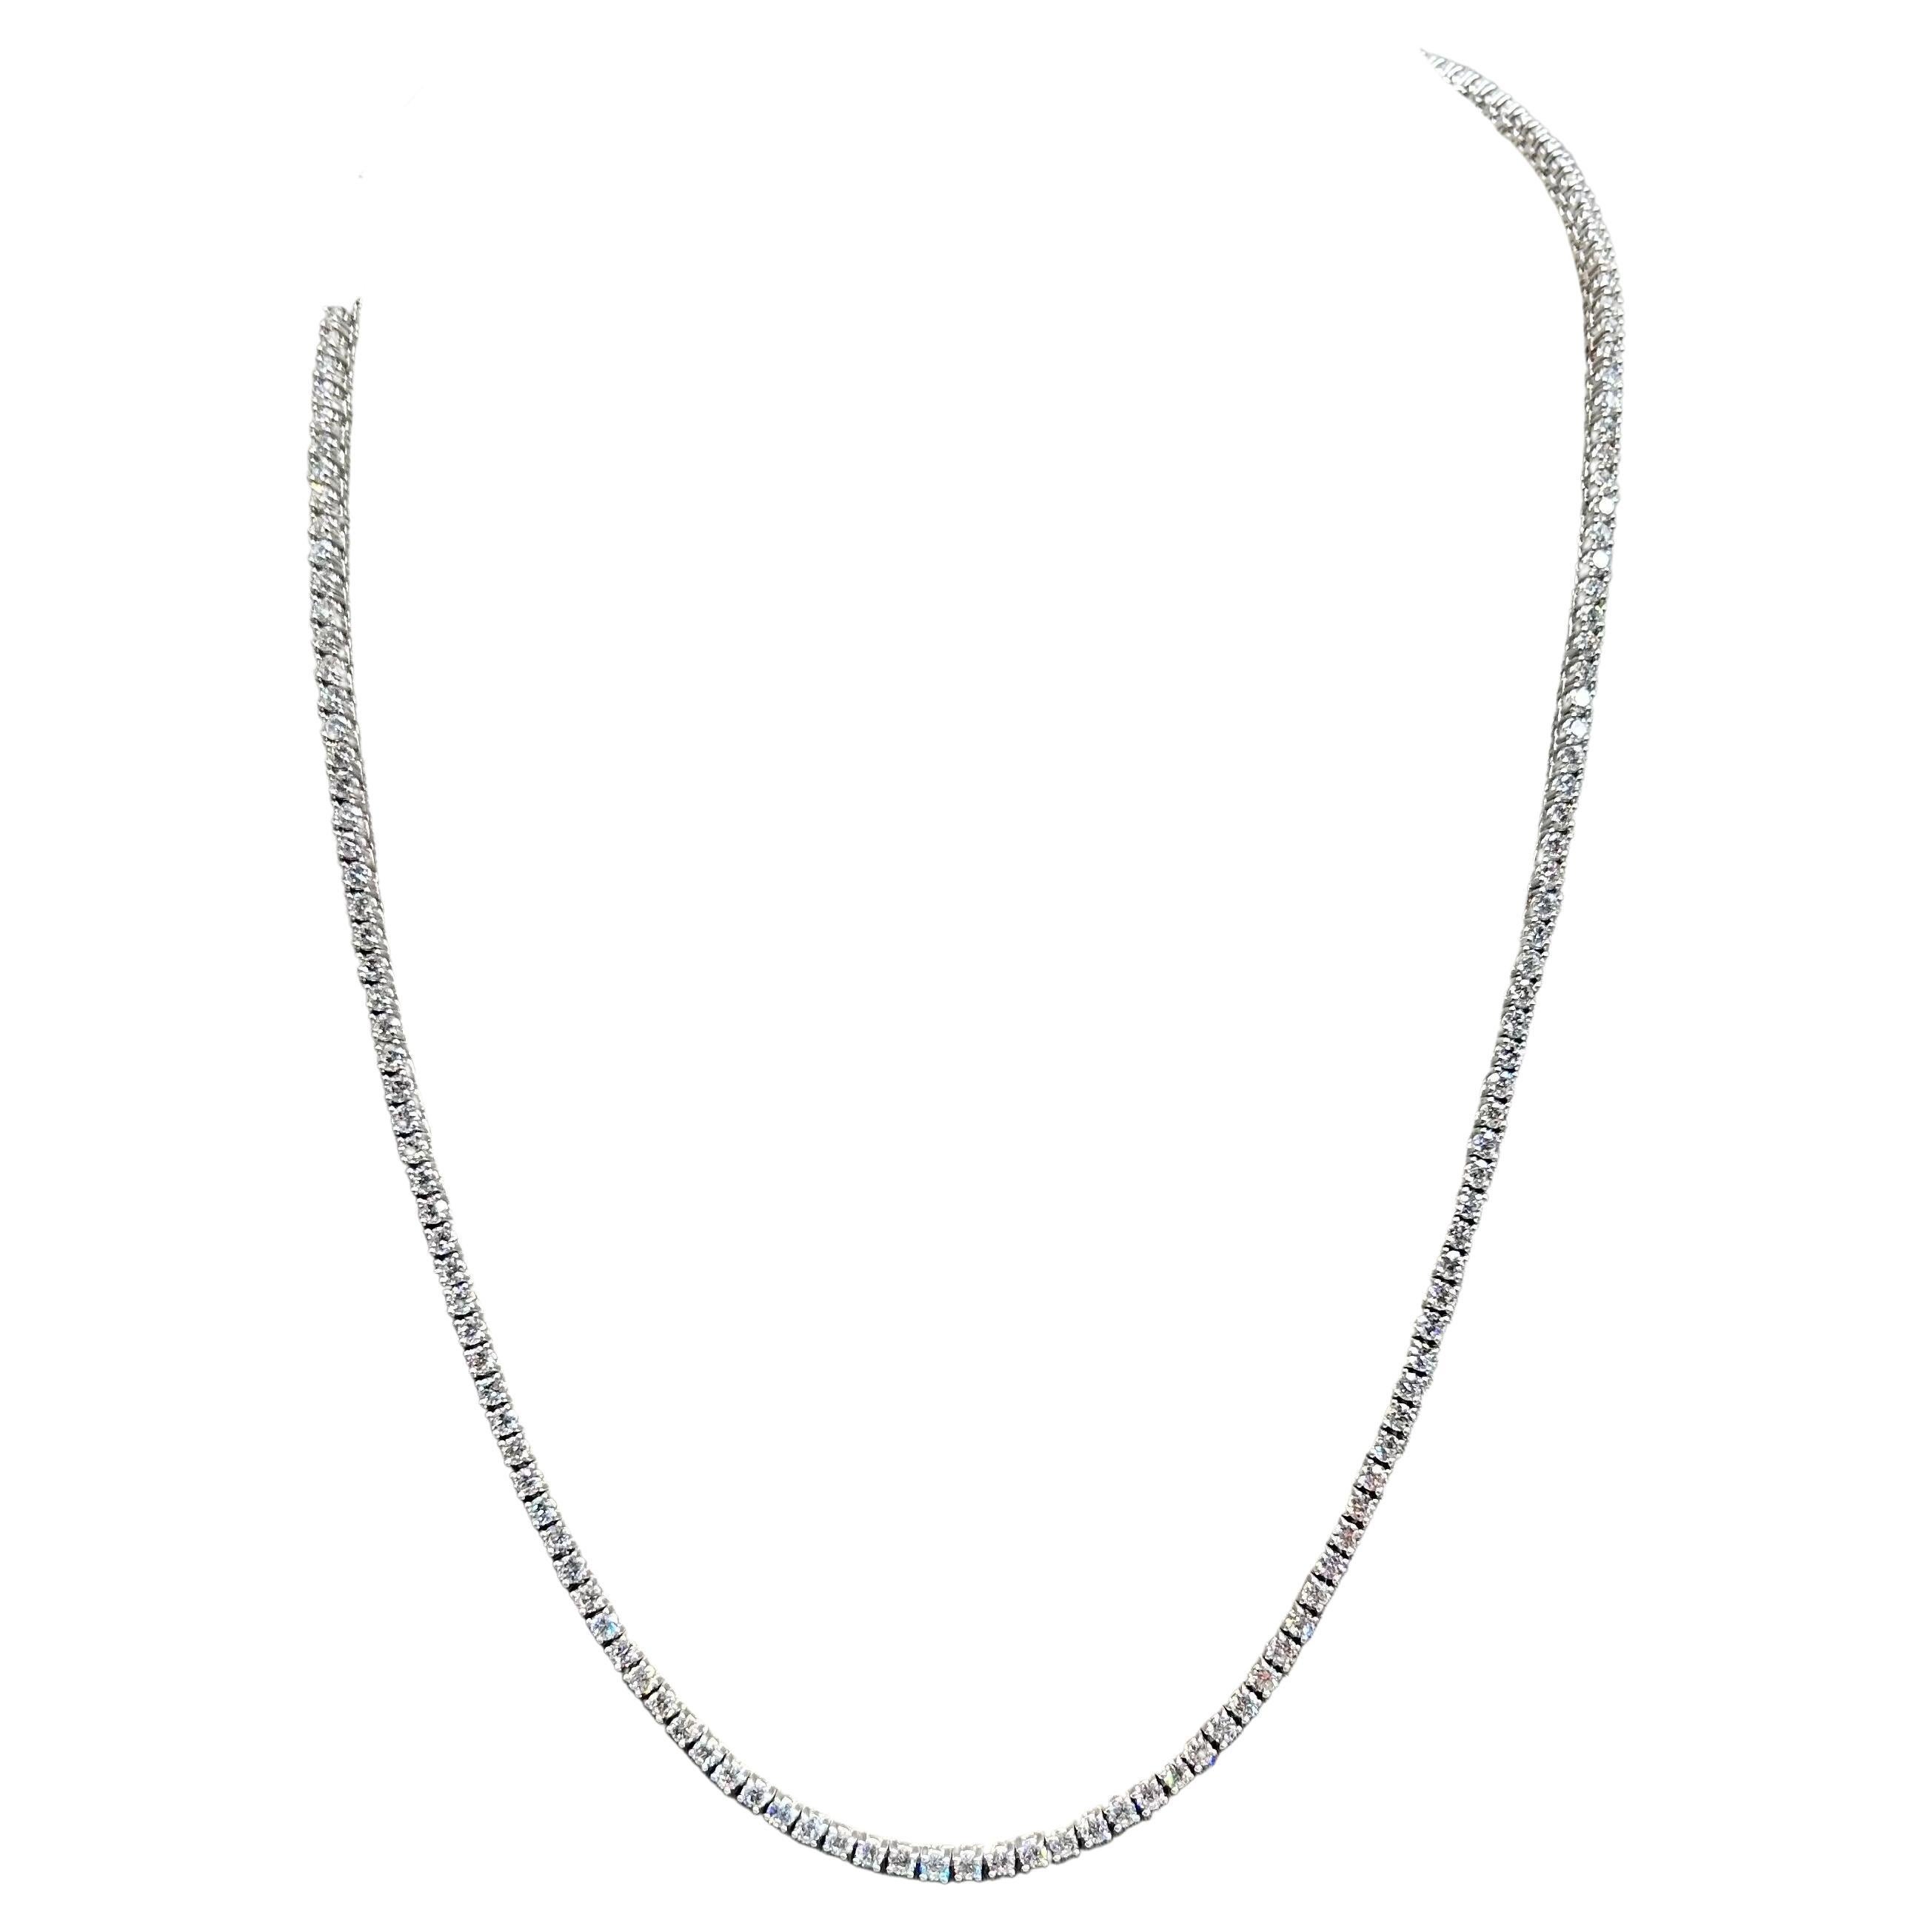 9.5 TCW Diamond Tennis Necklace In White Gold , 22 inches 